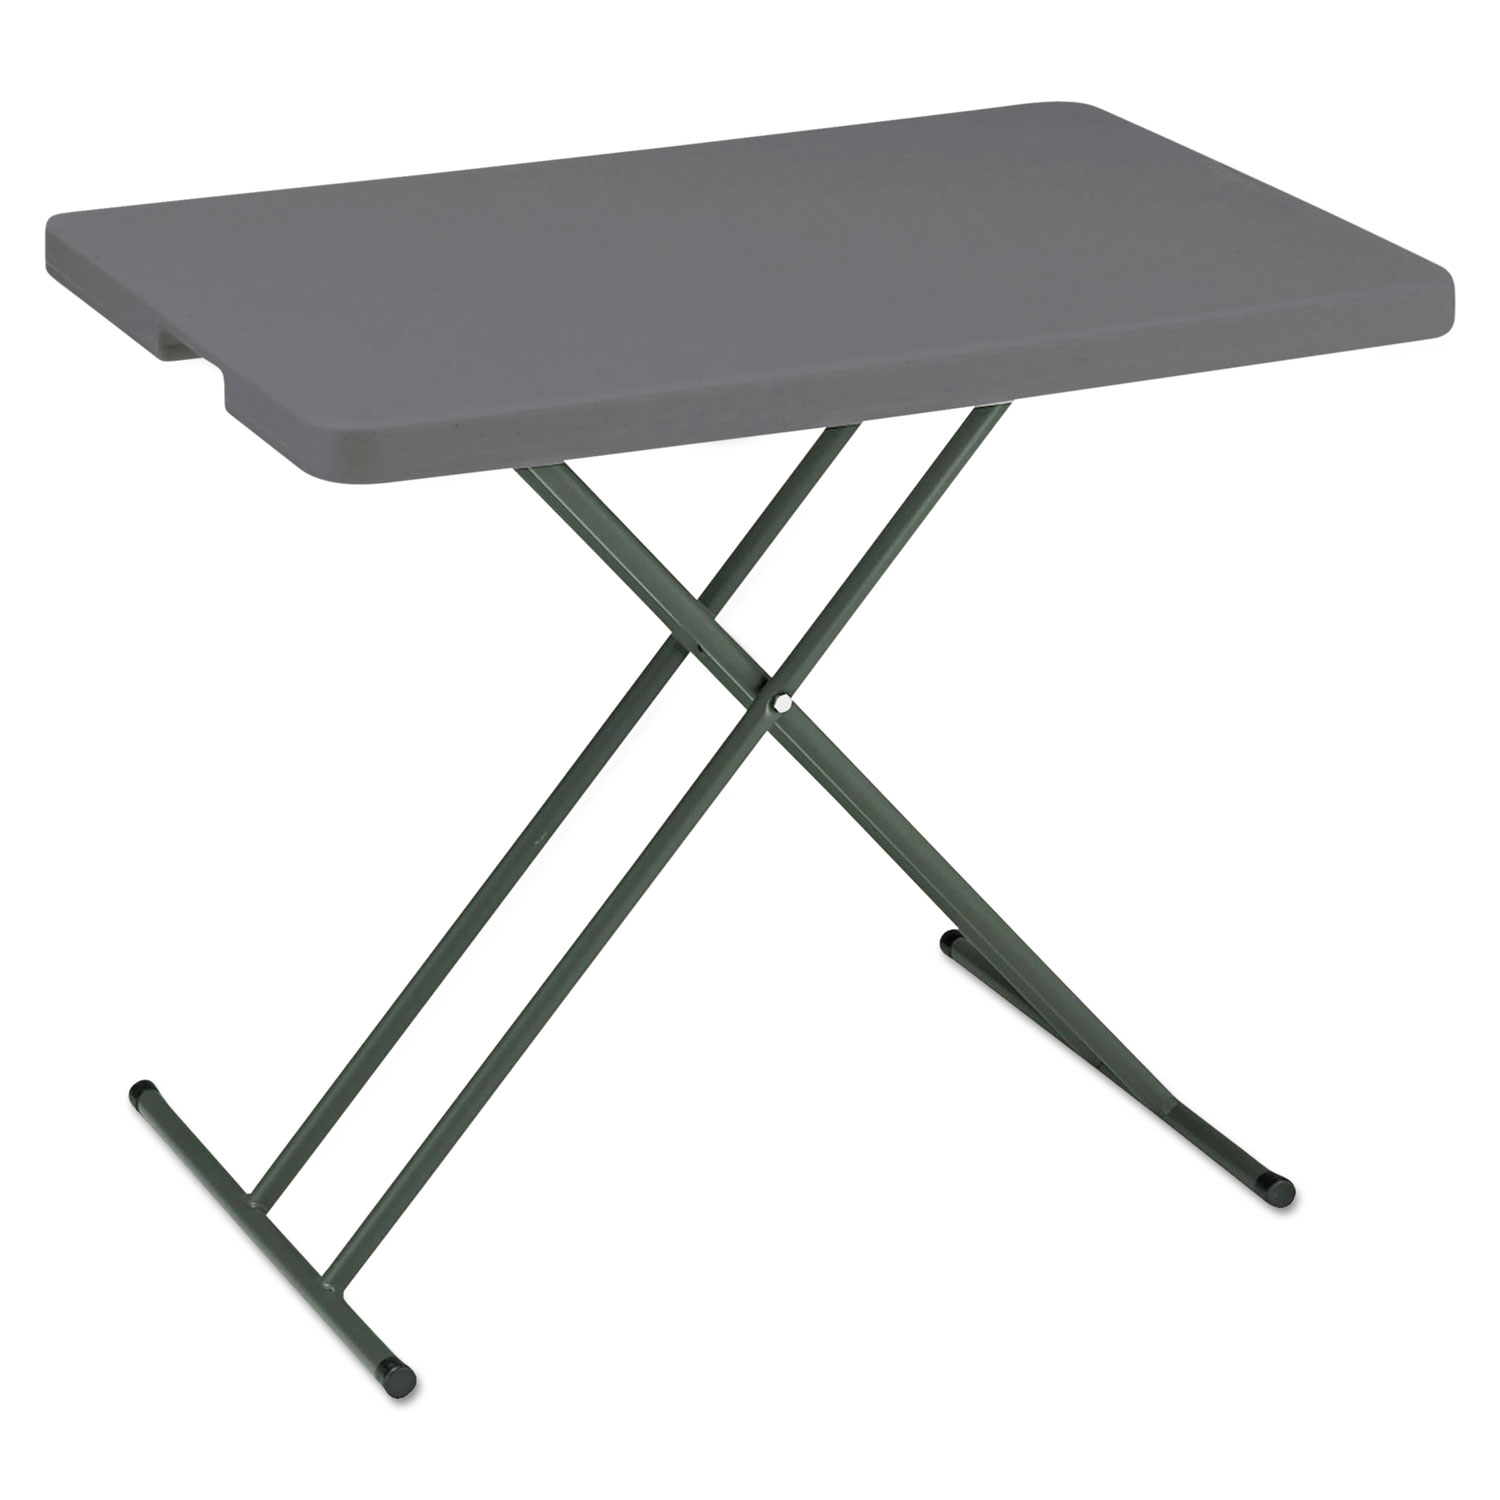 IndestrucTables Too 1200 Series Resin Personal Folding Table, 30 x 20, Charcoal